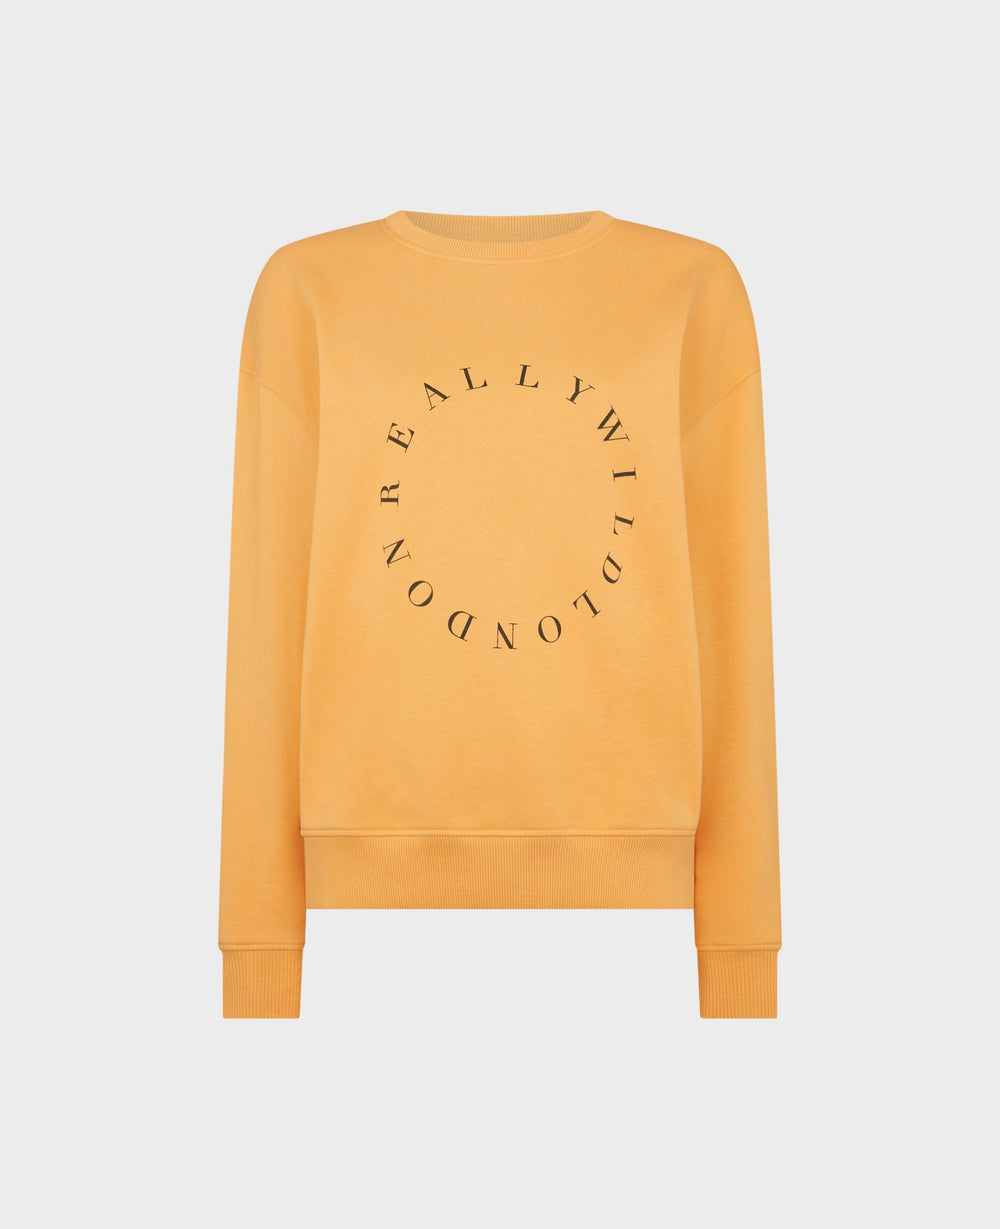 Our Really Wild logo print sweatshirt comes in 100% organic cotton and in orange. Perfect for pairing with denim.